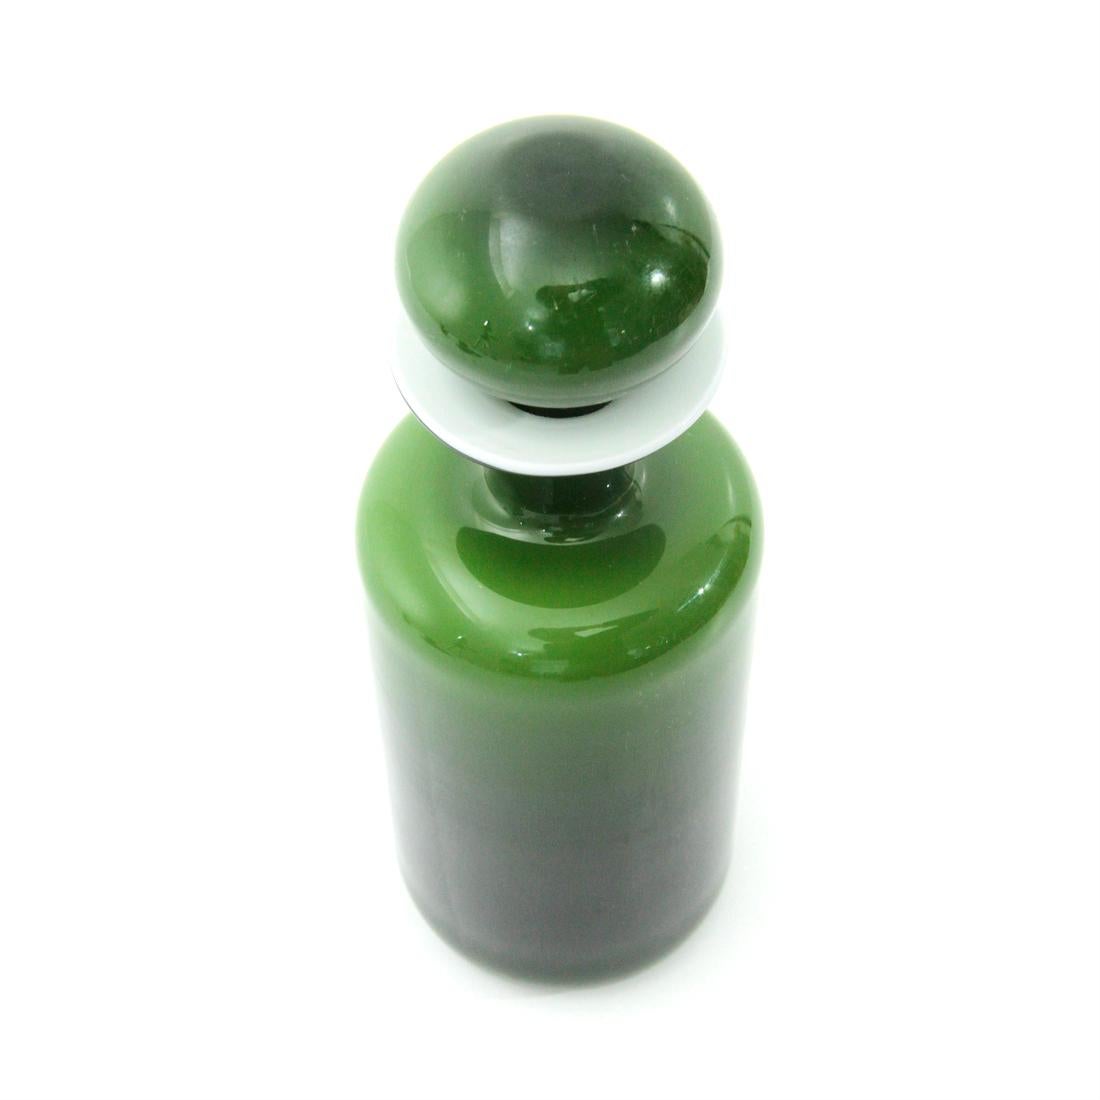 Vase produced by Holmegaard in the 1960s based on a design by Otto Brauer.
Green glass with white glass interior.
Green glass stopper.
Good general conditions, some signs due to normal use over time.

Dimensions: Diameter 8.5 cm, height 25 cm.